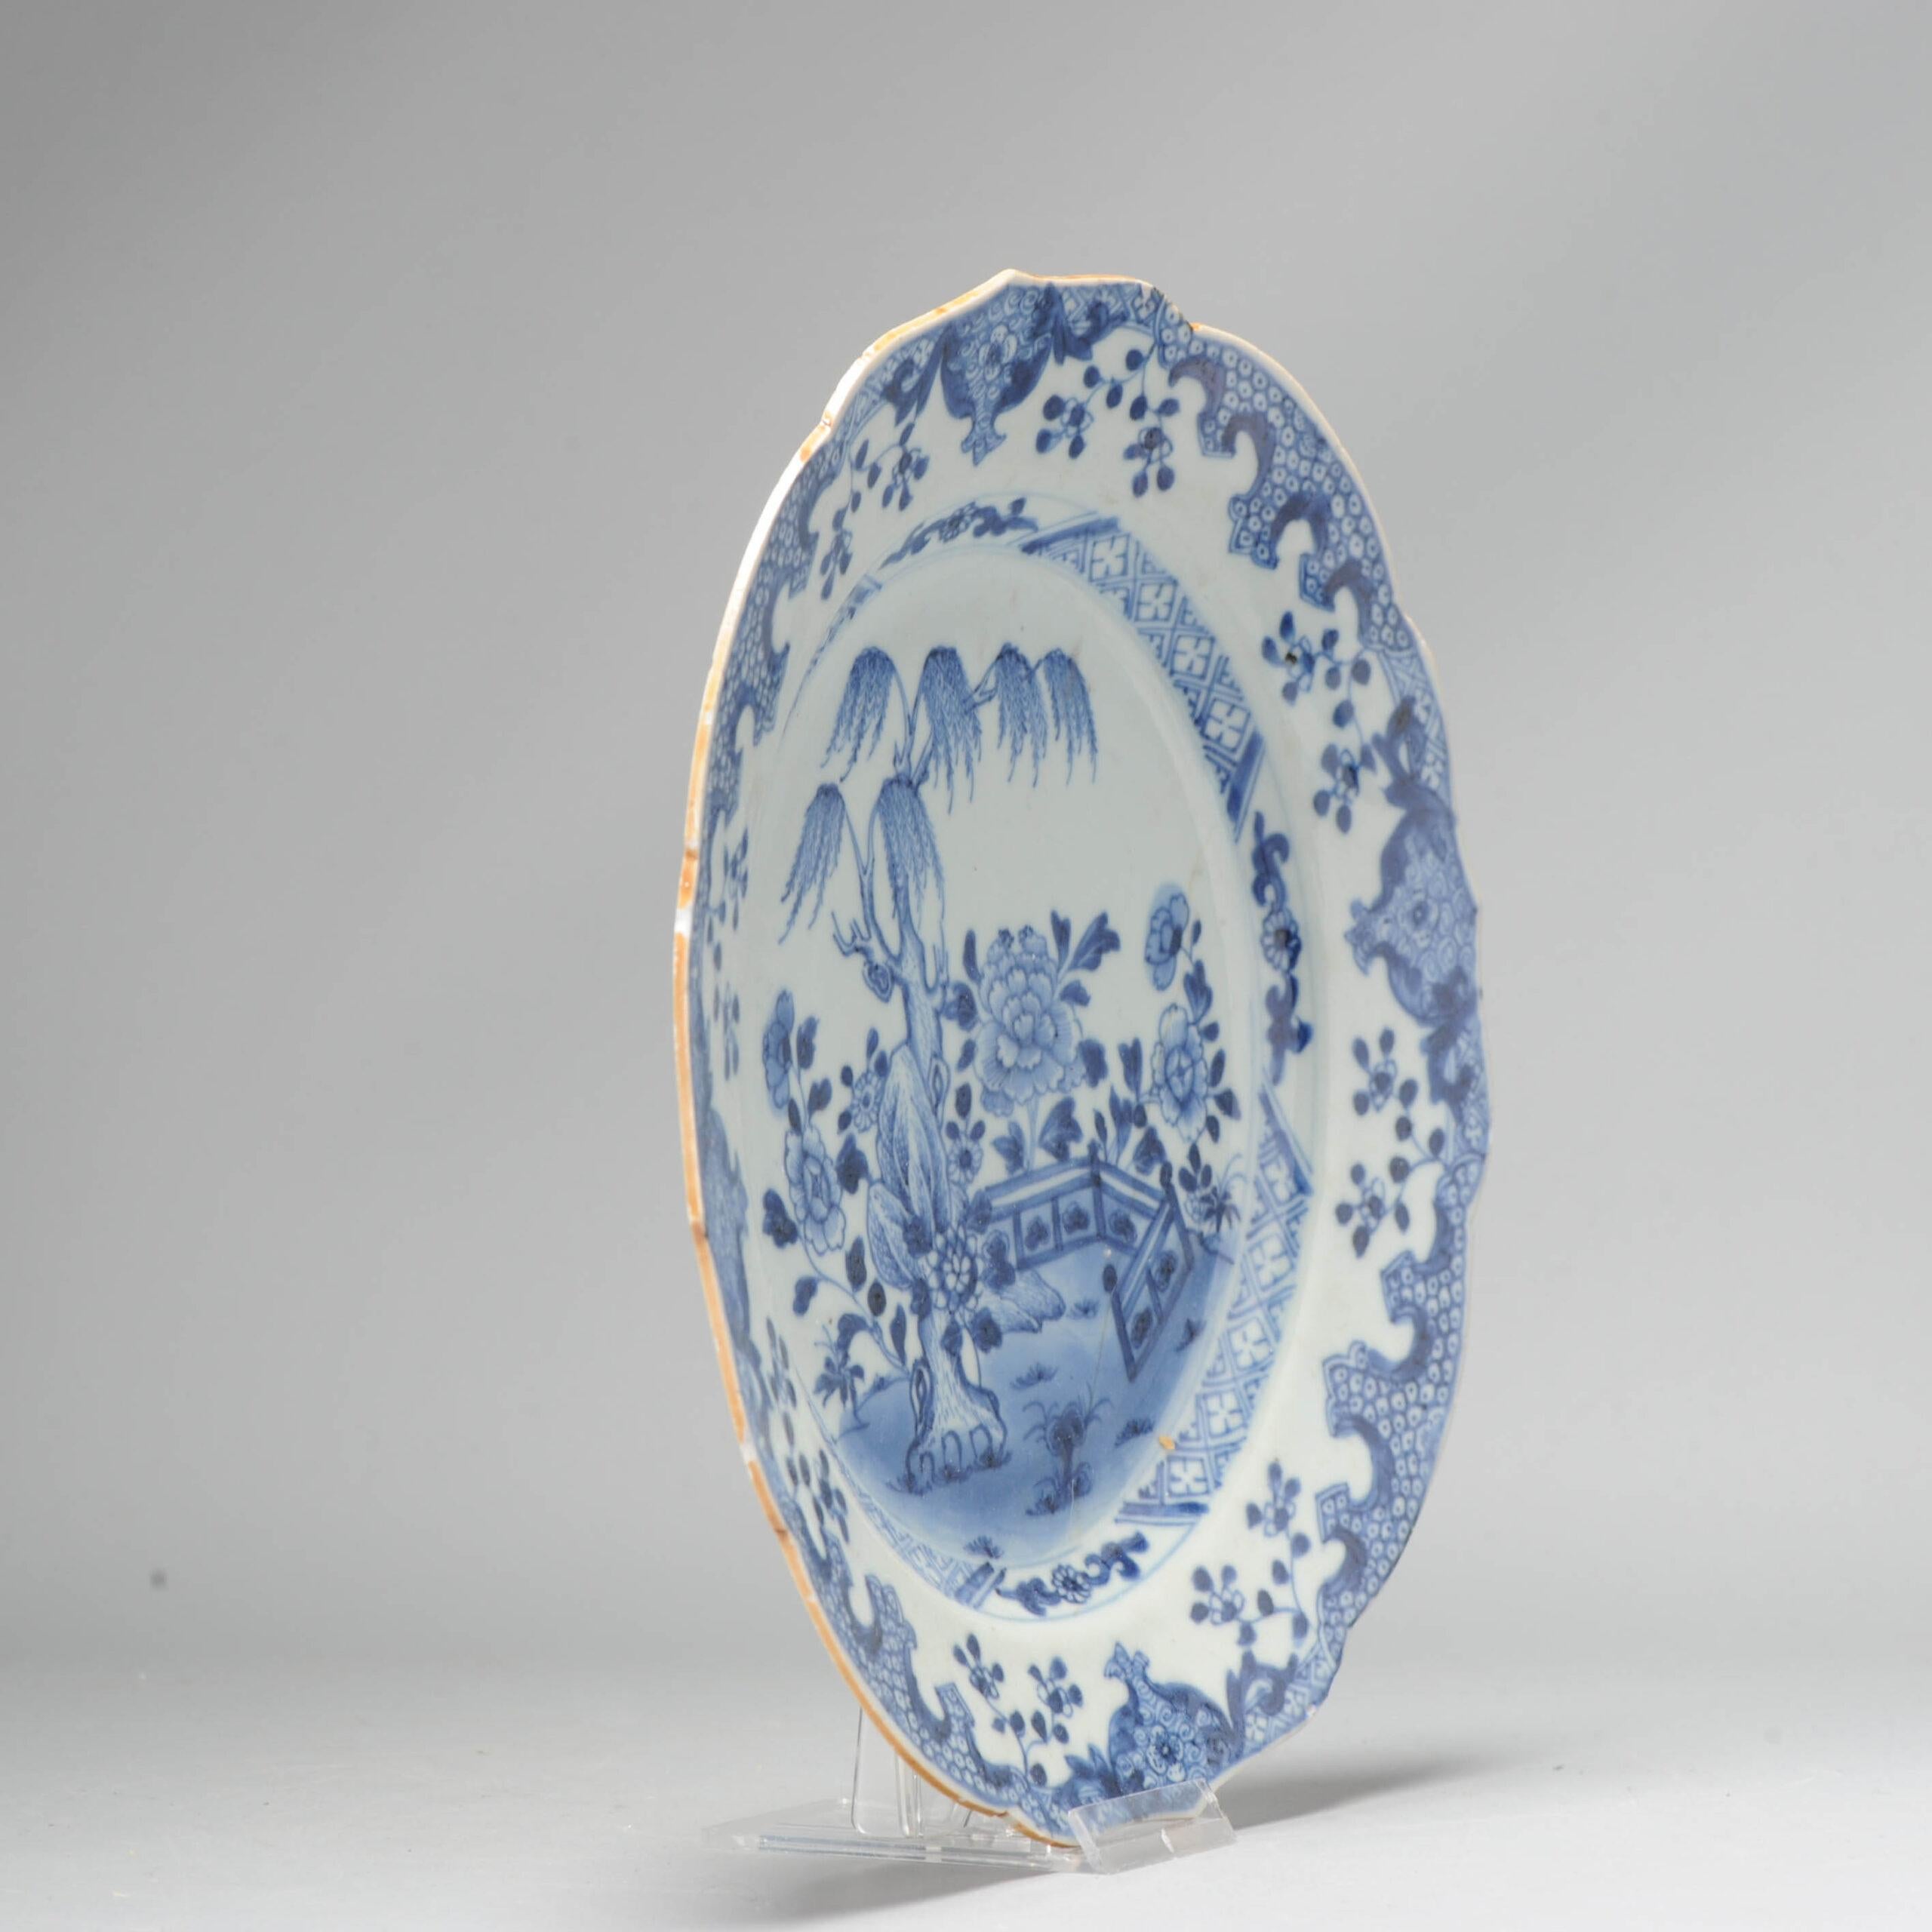 Superb quality piece from the Qianlong period.

High quality scene of a garden scene with landscape.

Additional information:
Material: Porcelain & Pottery
Type: Plates
Color: Blue & White
Region of Origin: China
Emperor: Qianlong (1735-1796)
Age: